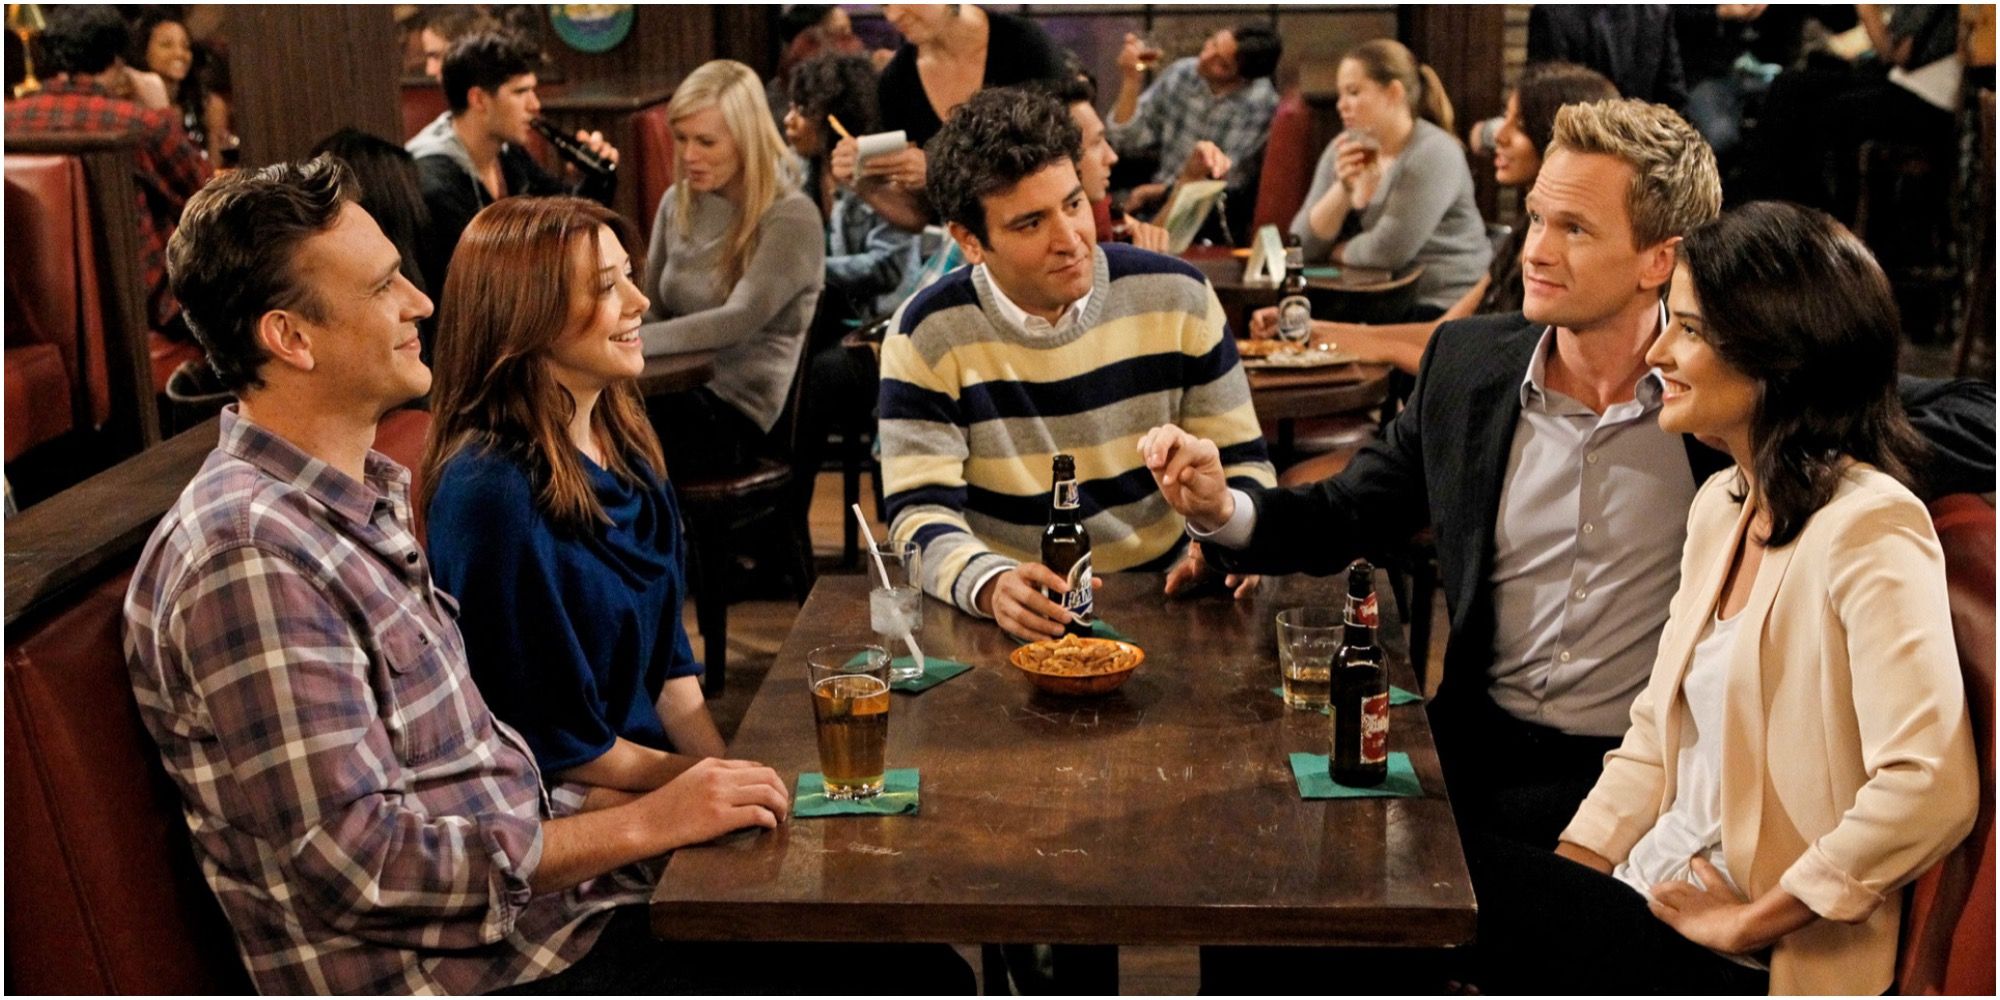 How I Met Your Mother Picture Of The Cast At The Pub